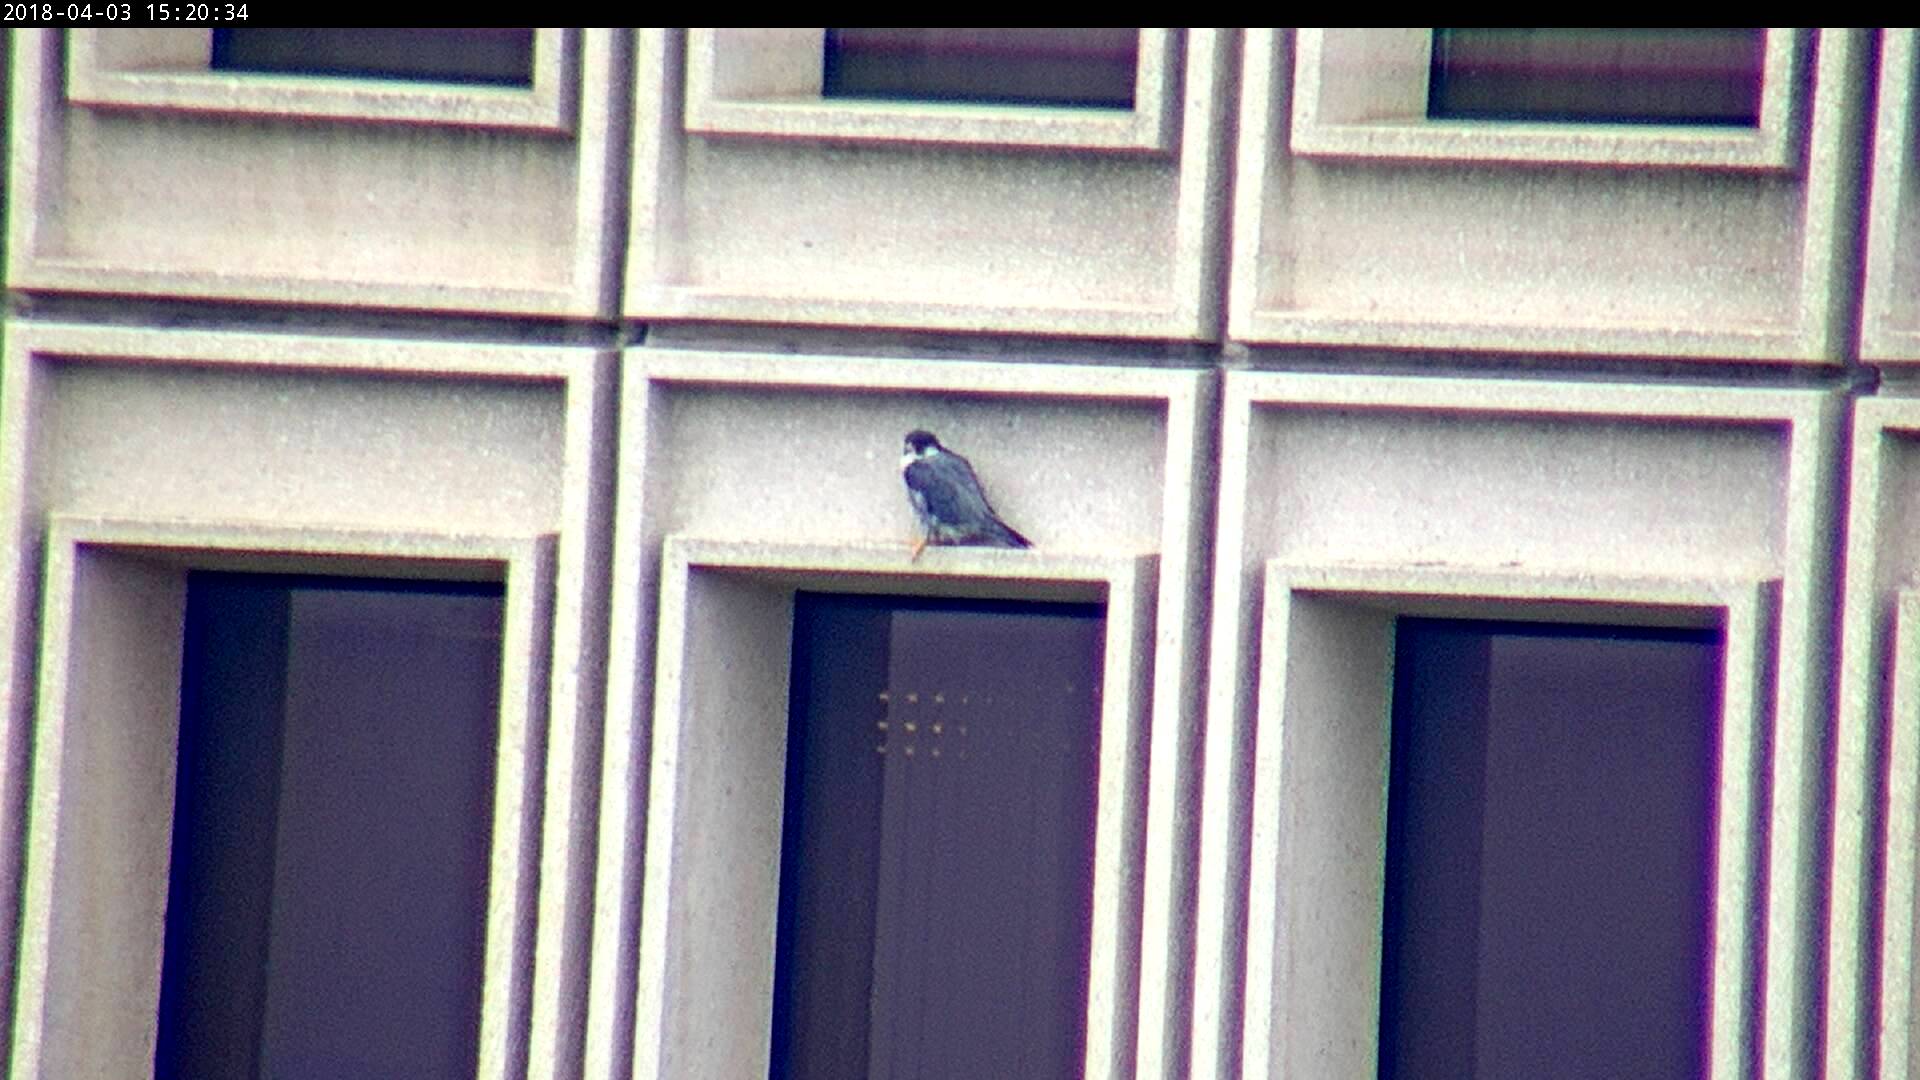 Astrid takes a relatively low perch on the State Building.